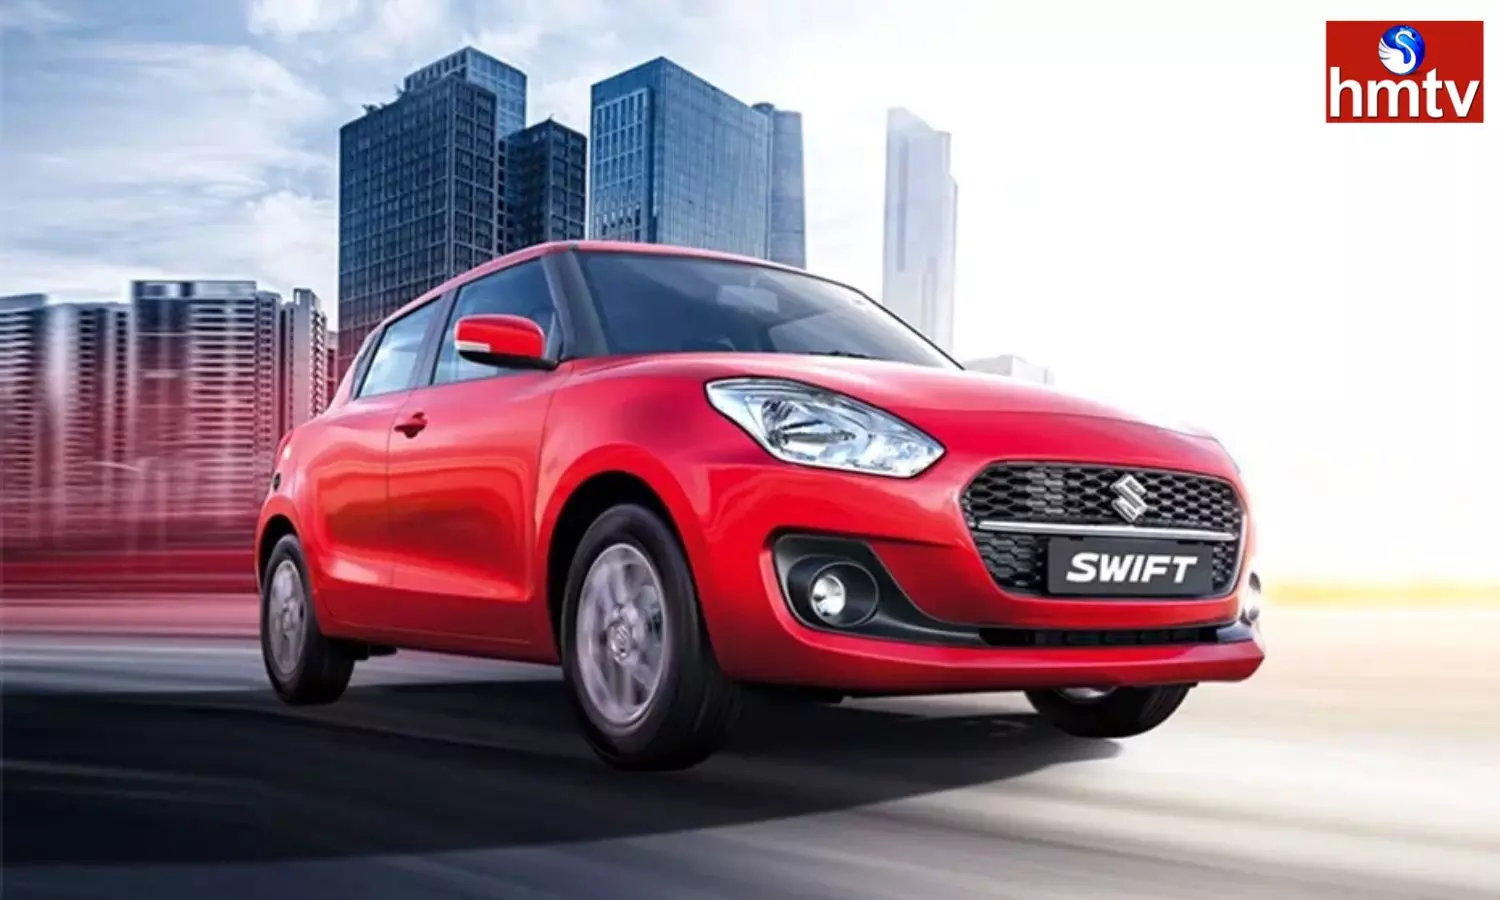 Maruti Swift is the Best Selling Car in India Check Price and Features